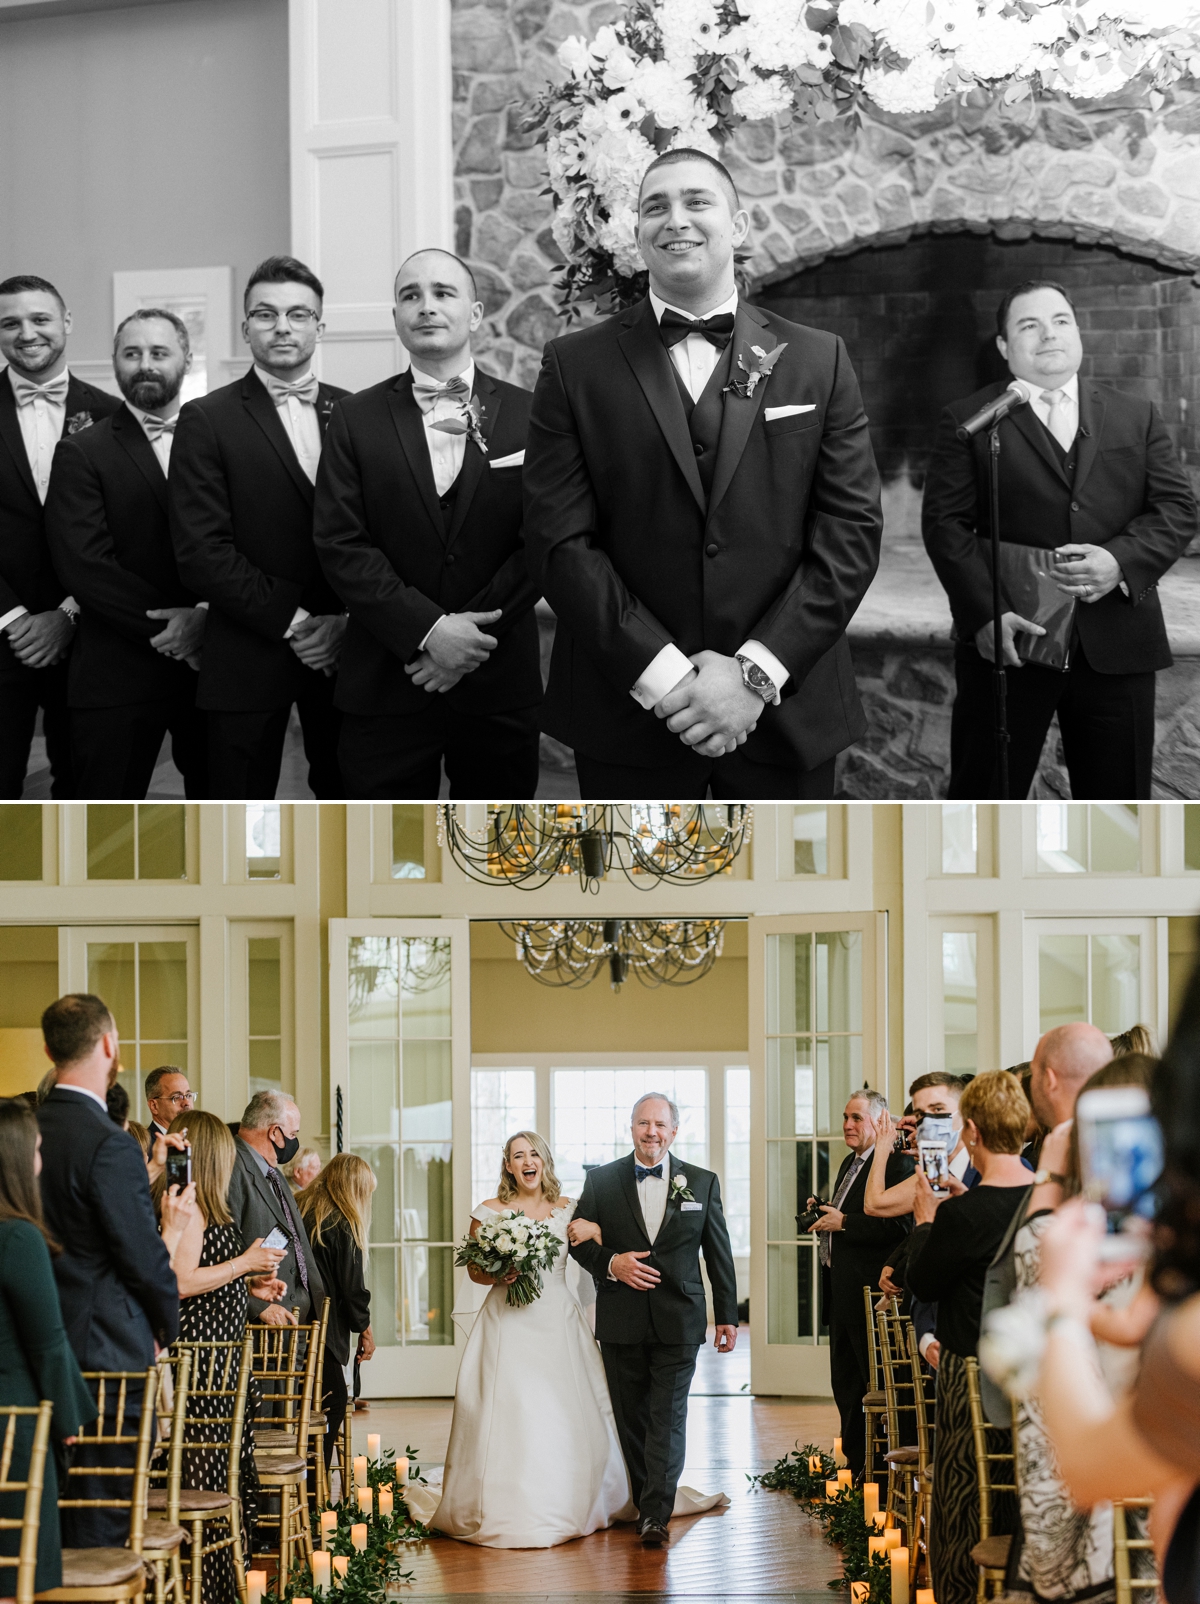 Candid wedding photography at The Ryland Inn 